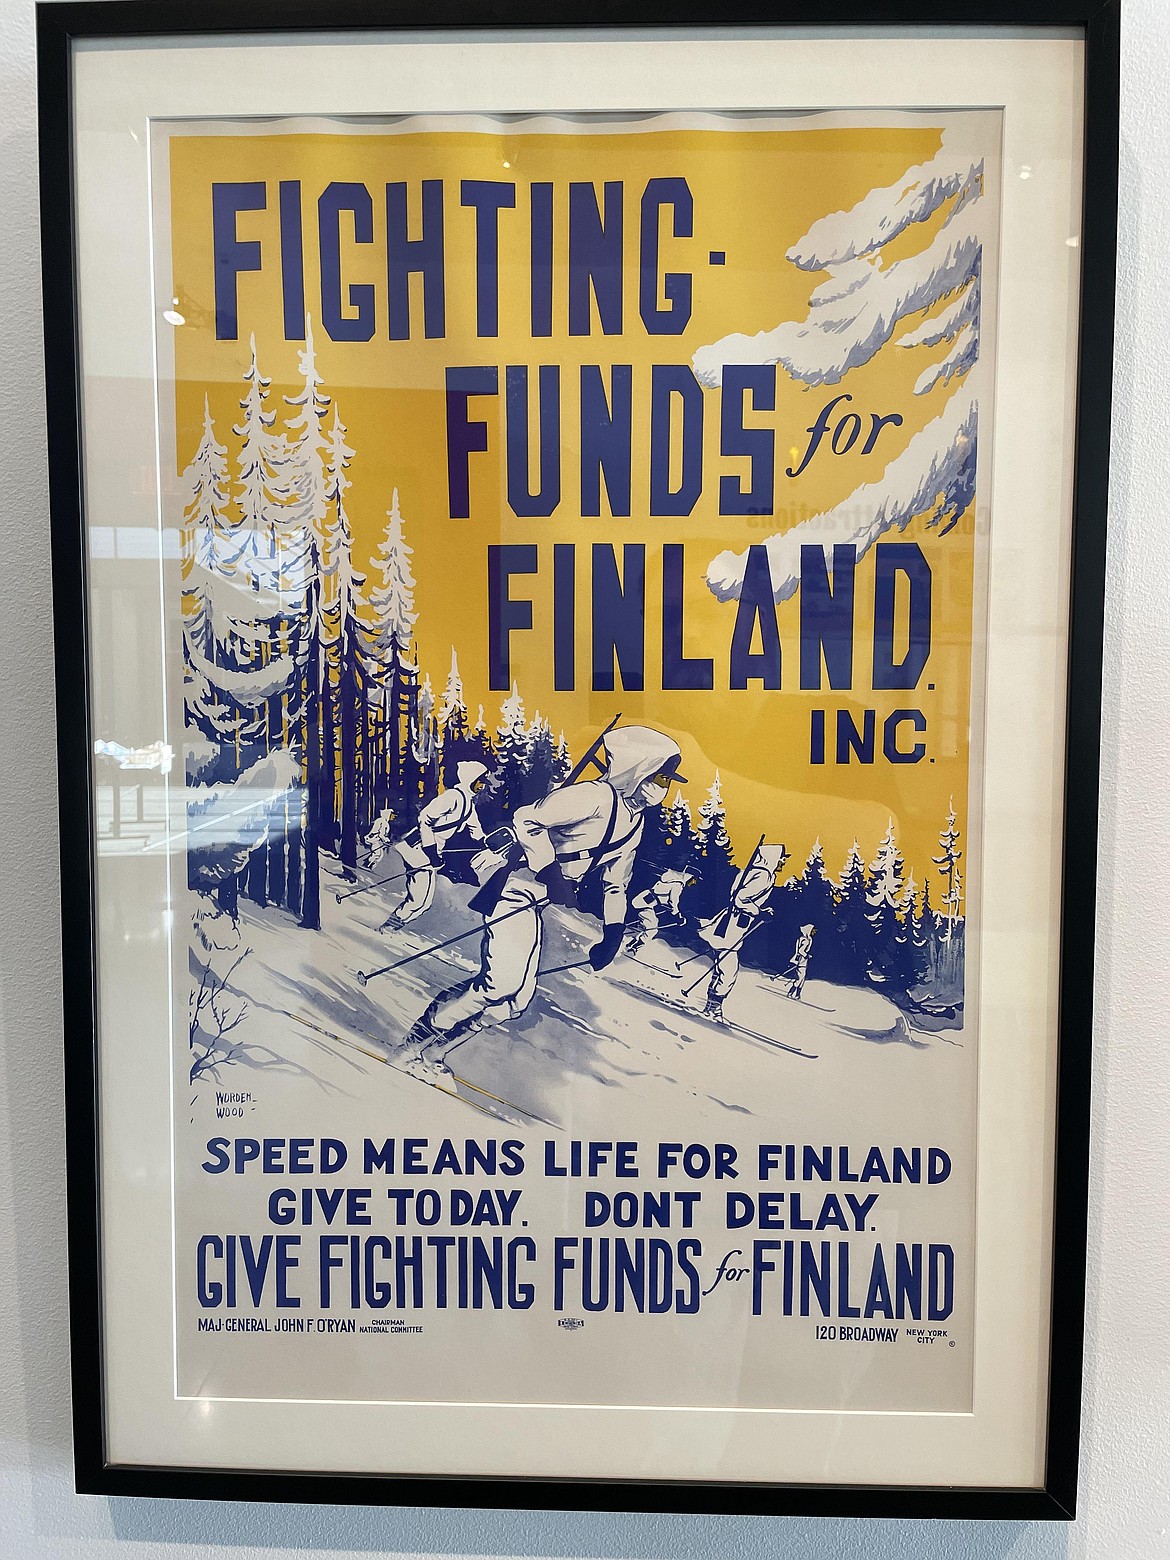 “Fighting Funds For Finland” solicited aid for Finnish relief during the roughly four-month-long Winter War that began when the Soviet Union invaded Finland on Nov. 30, 1939.